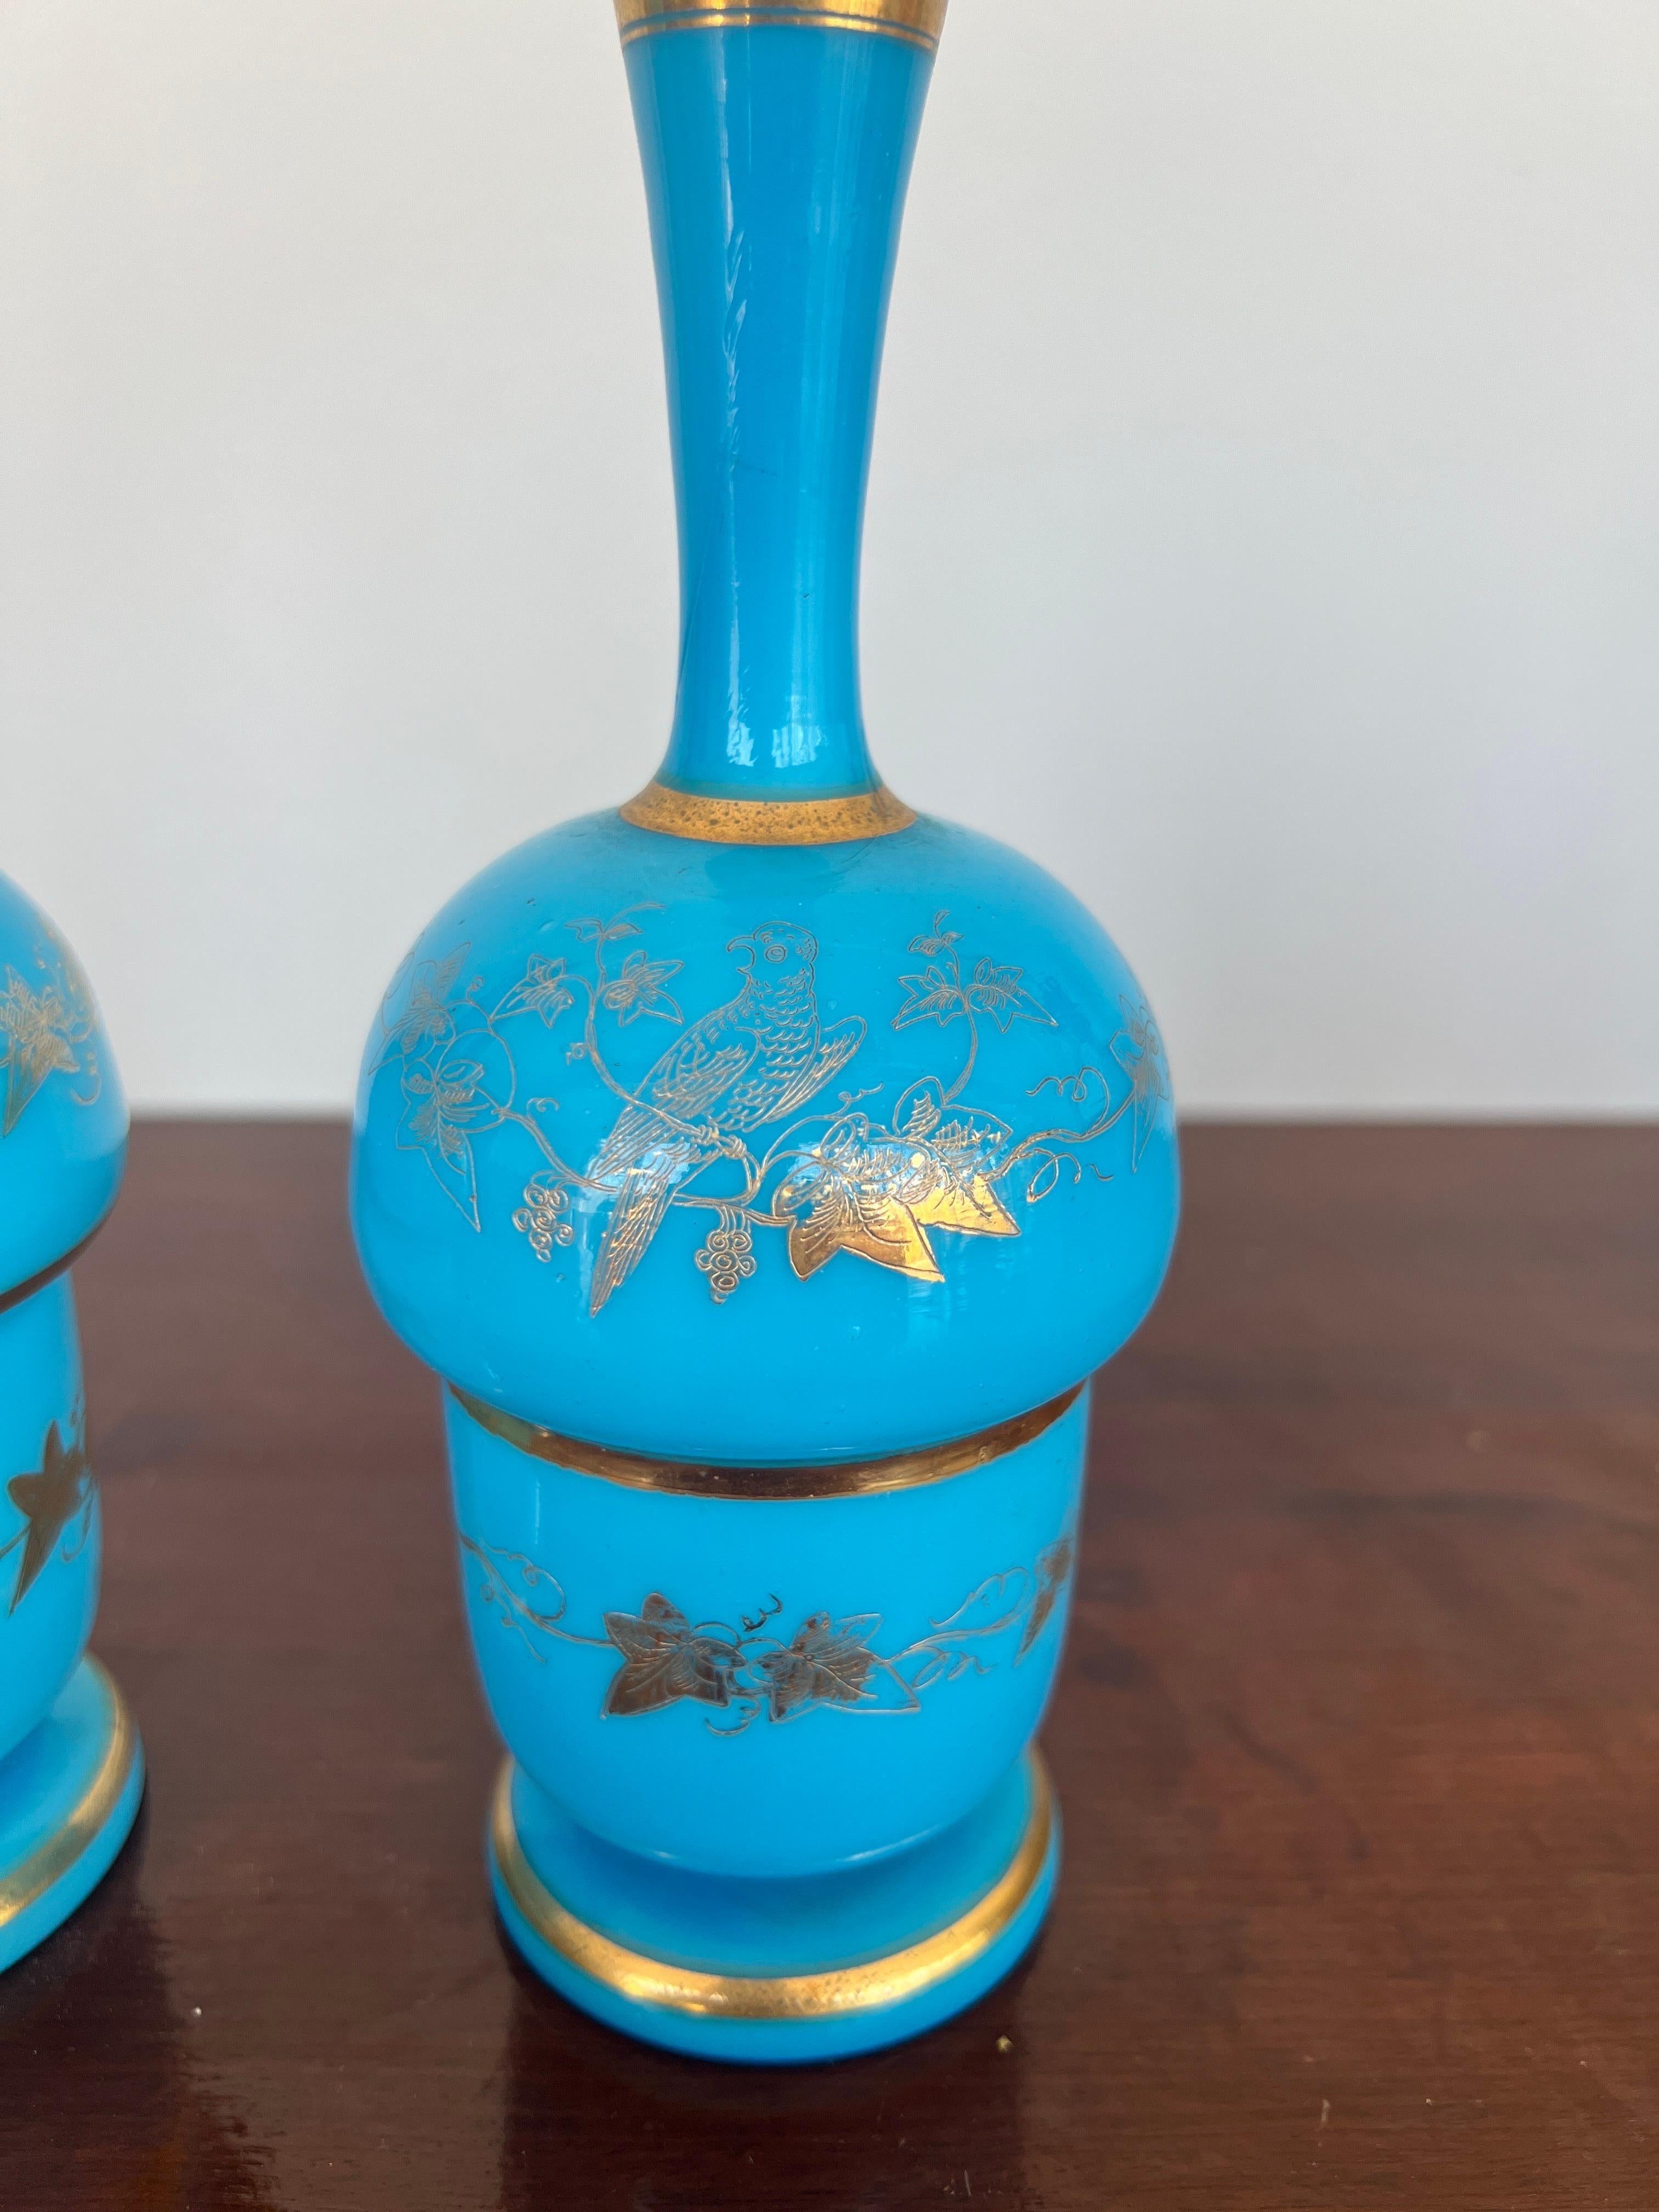 French, 20th century. 
A pair of blue opaline bud vases with gold foliate and vine decoration.